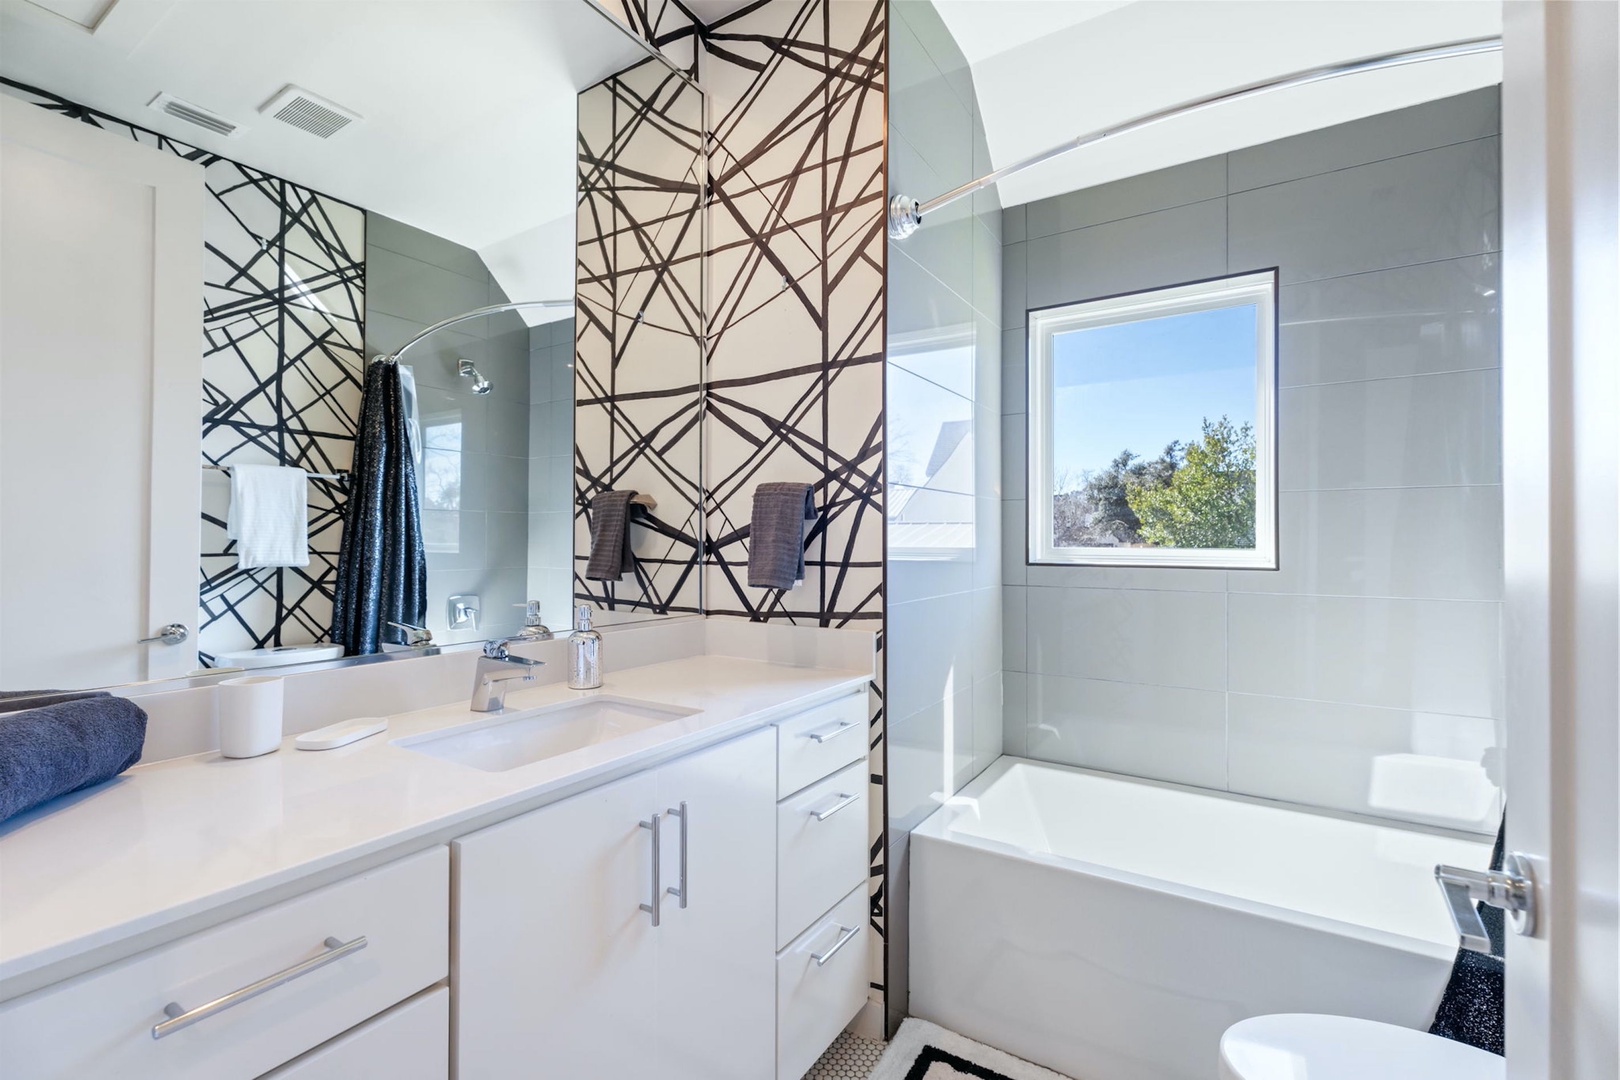 The 2nd-floor full bath features a spacious single vanity & shower/tub combo